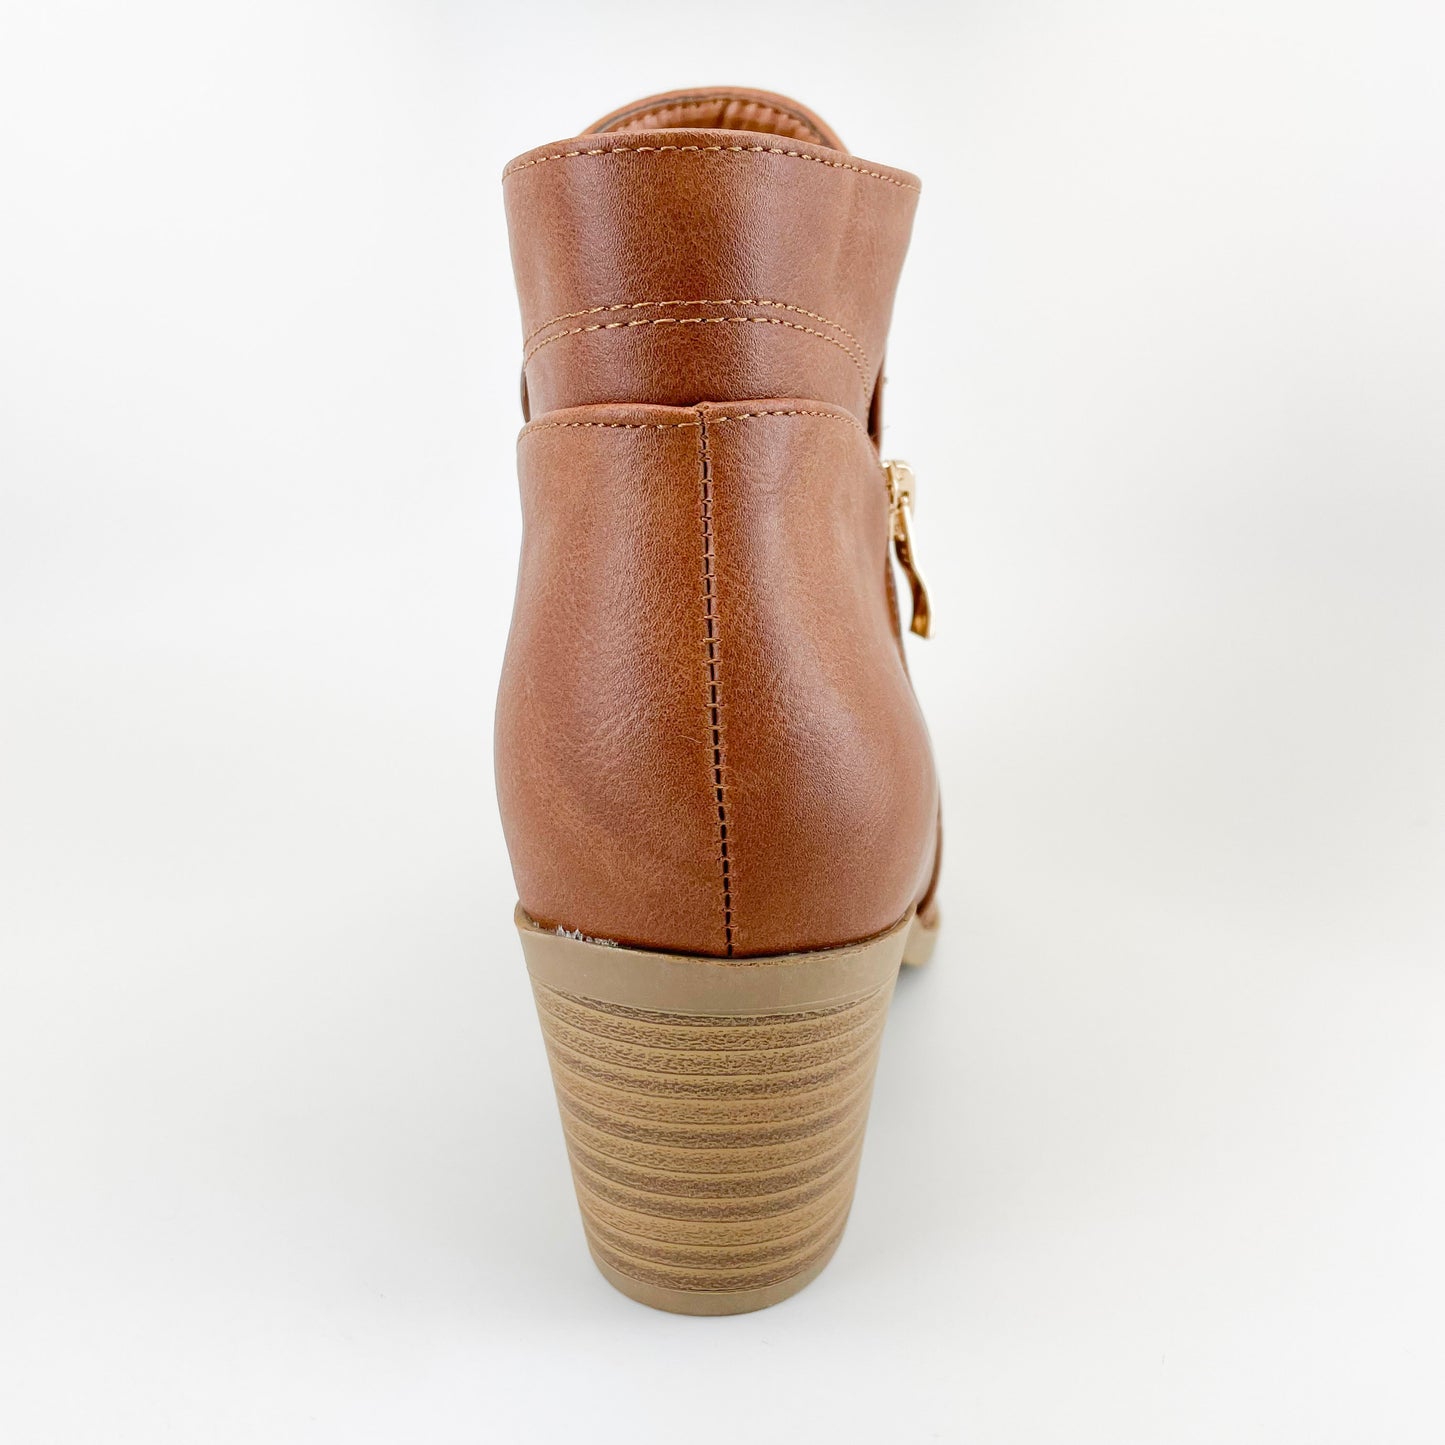 "Aster" Zipper Ankle Boots